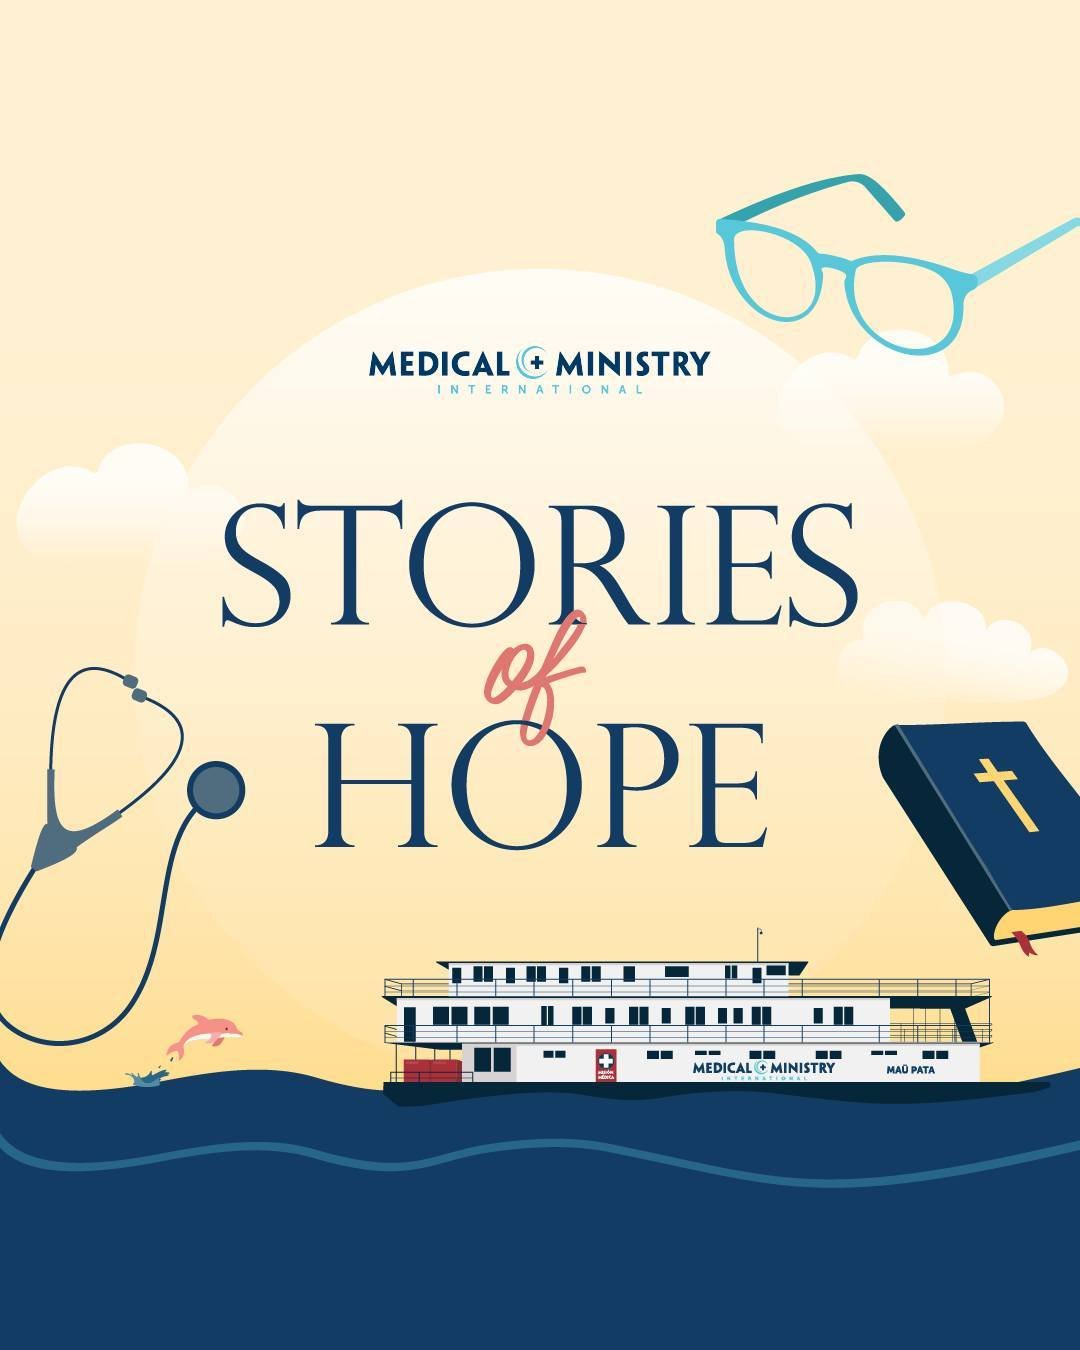 📅 Mark your calendars for May 10! We are looking forward to &ldquo;Stories of Hope&rdquo;, our Spring Fundraising Gala! It will be an evening of celebration of all that God has done through Medical Ministry International. While we listen to the test